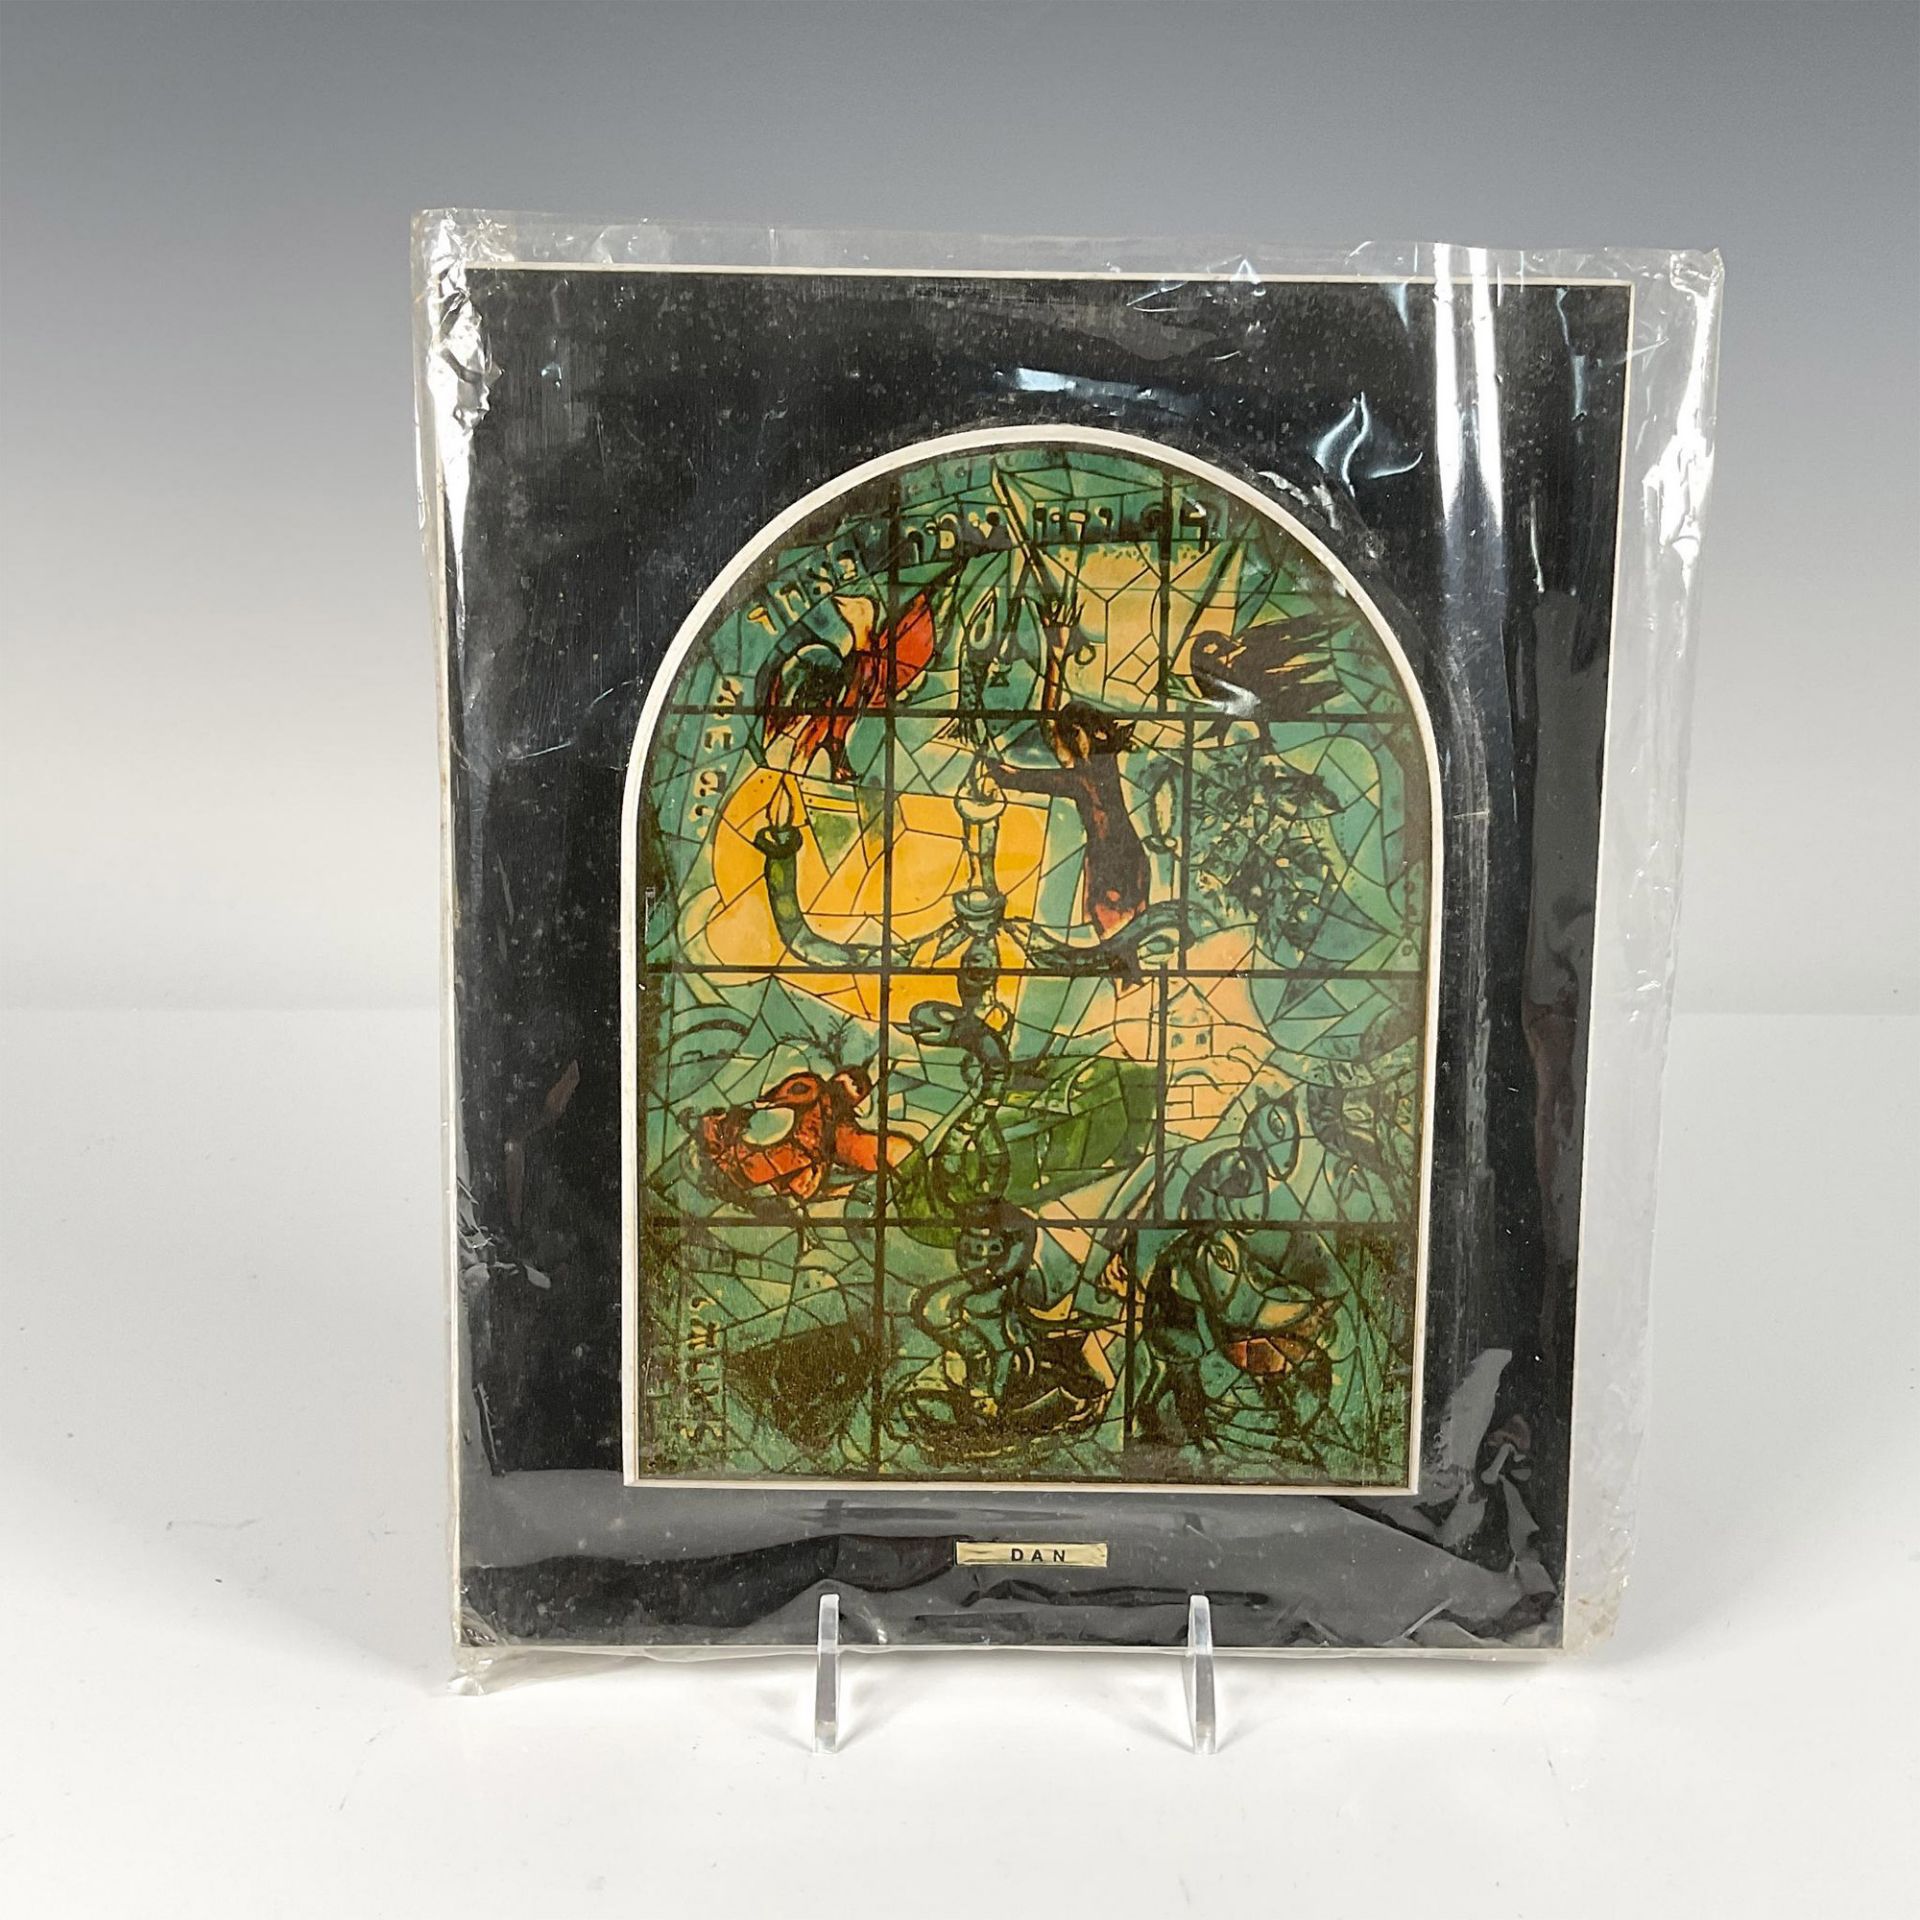 13pc After Marc Chagall by Avissar Wooden Plaques, The 12 Stained Glass Windows - Image 15 of 20